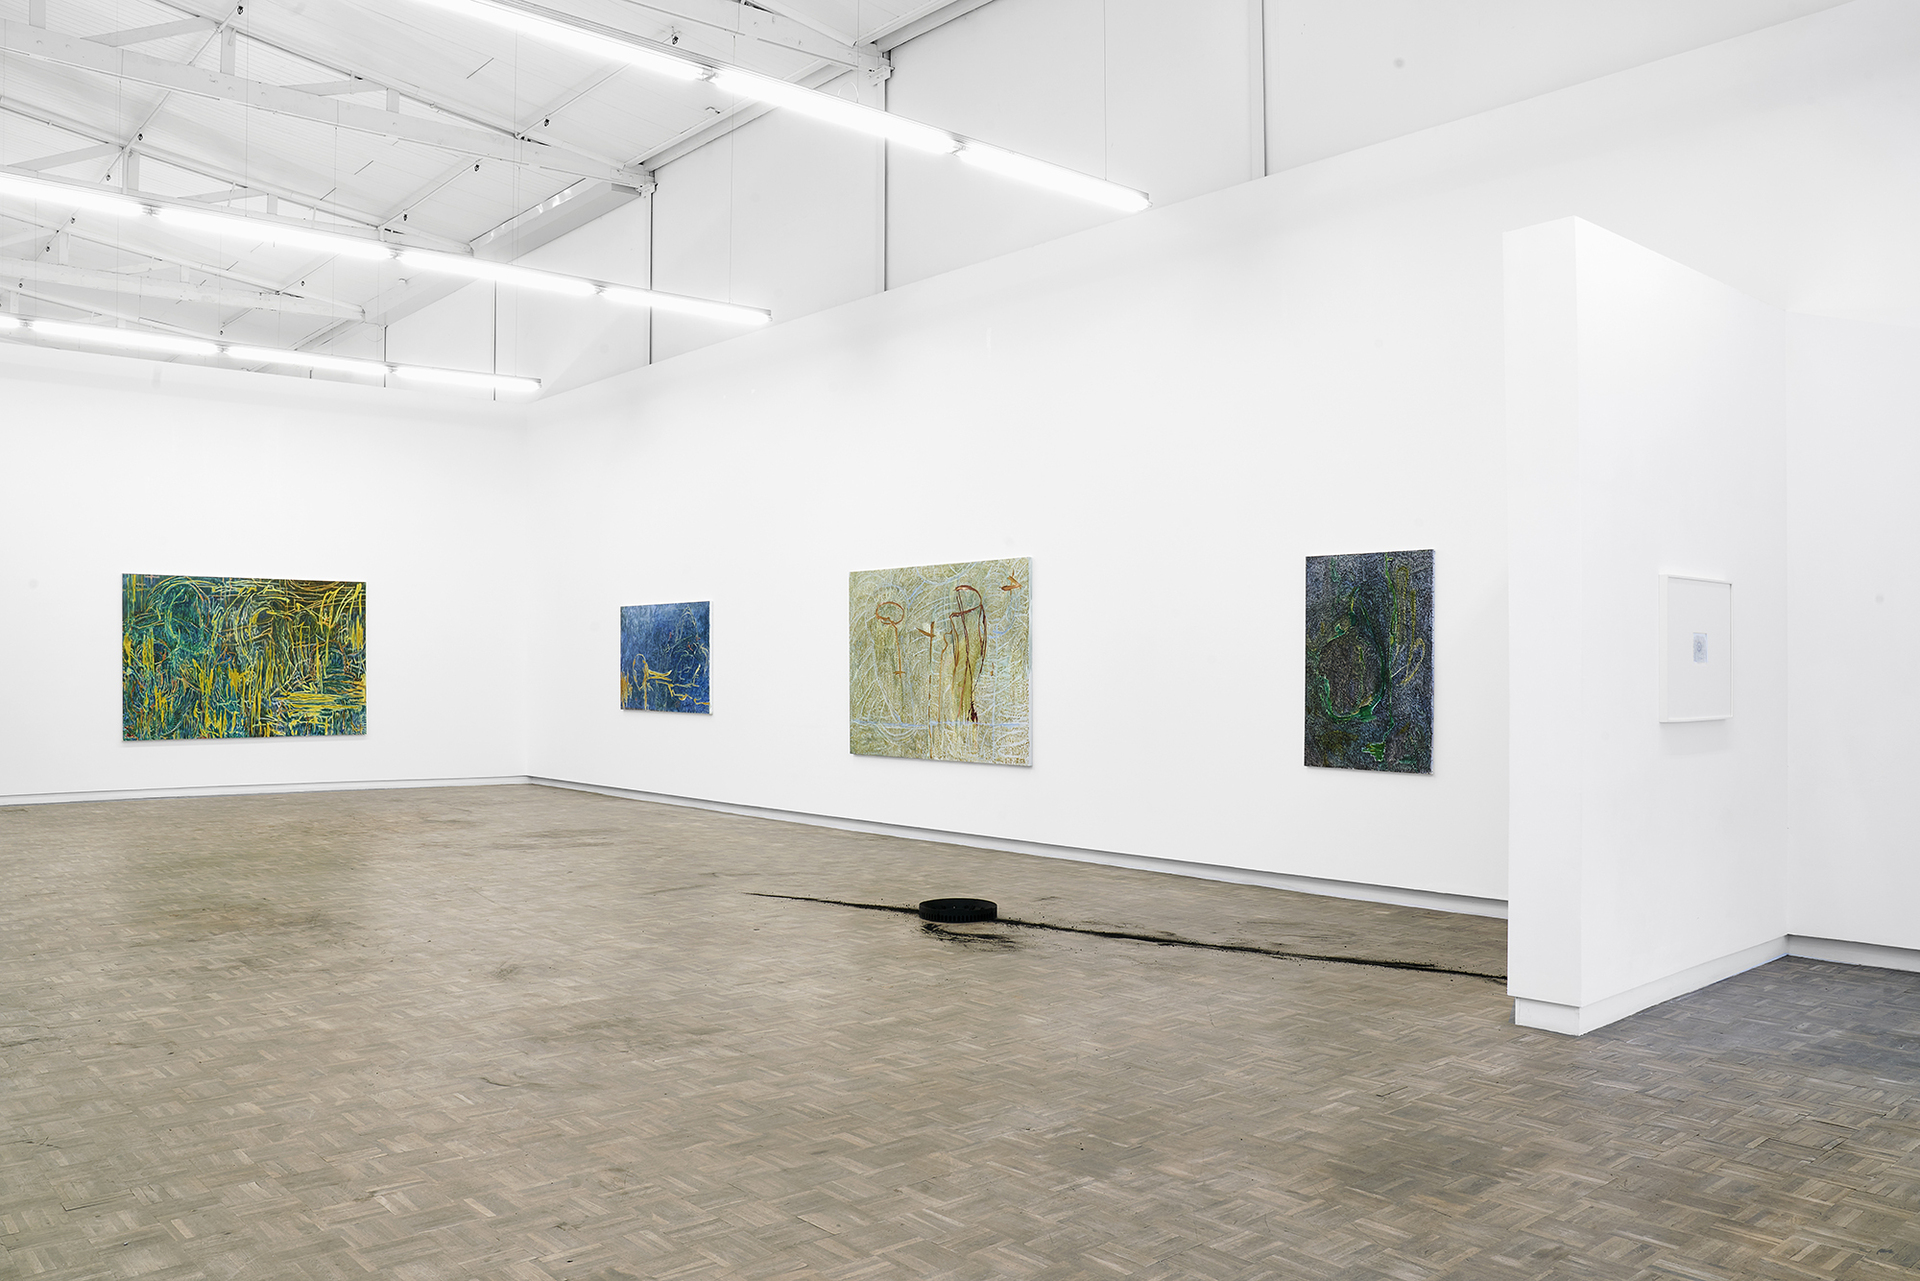 Achraf Touloub, 'Vies paralleles', 2022 | Installation view at blank projects, Cape Town (8)